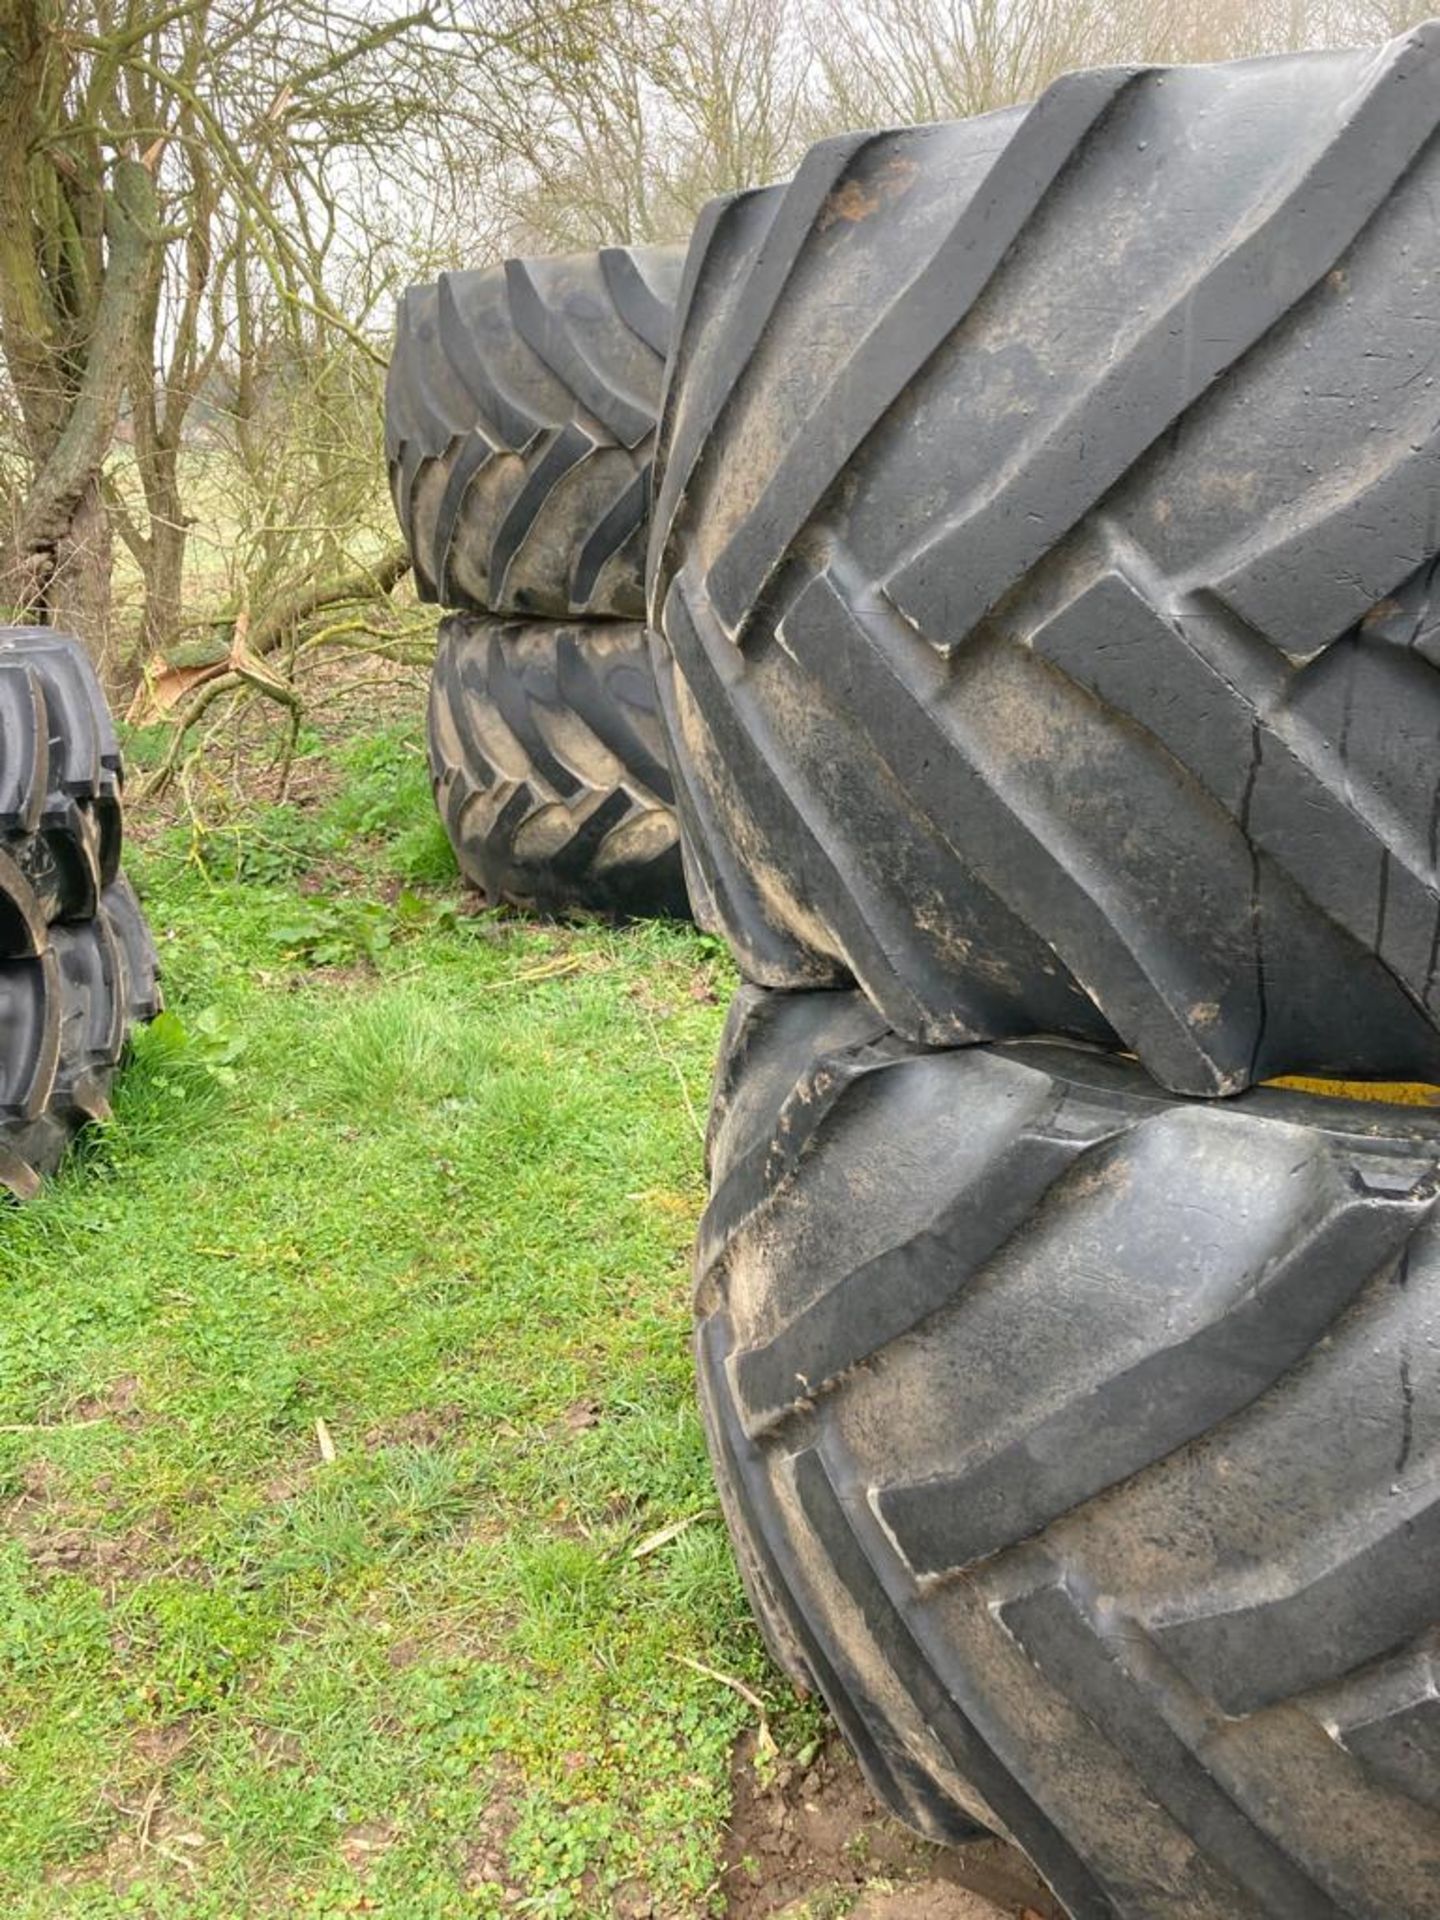 Tyres Rear 850/55/42 x 2 Front 750/50-30.5 x 2, for a 7530, Condition very little tread.